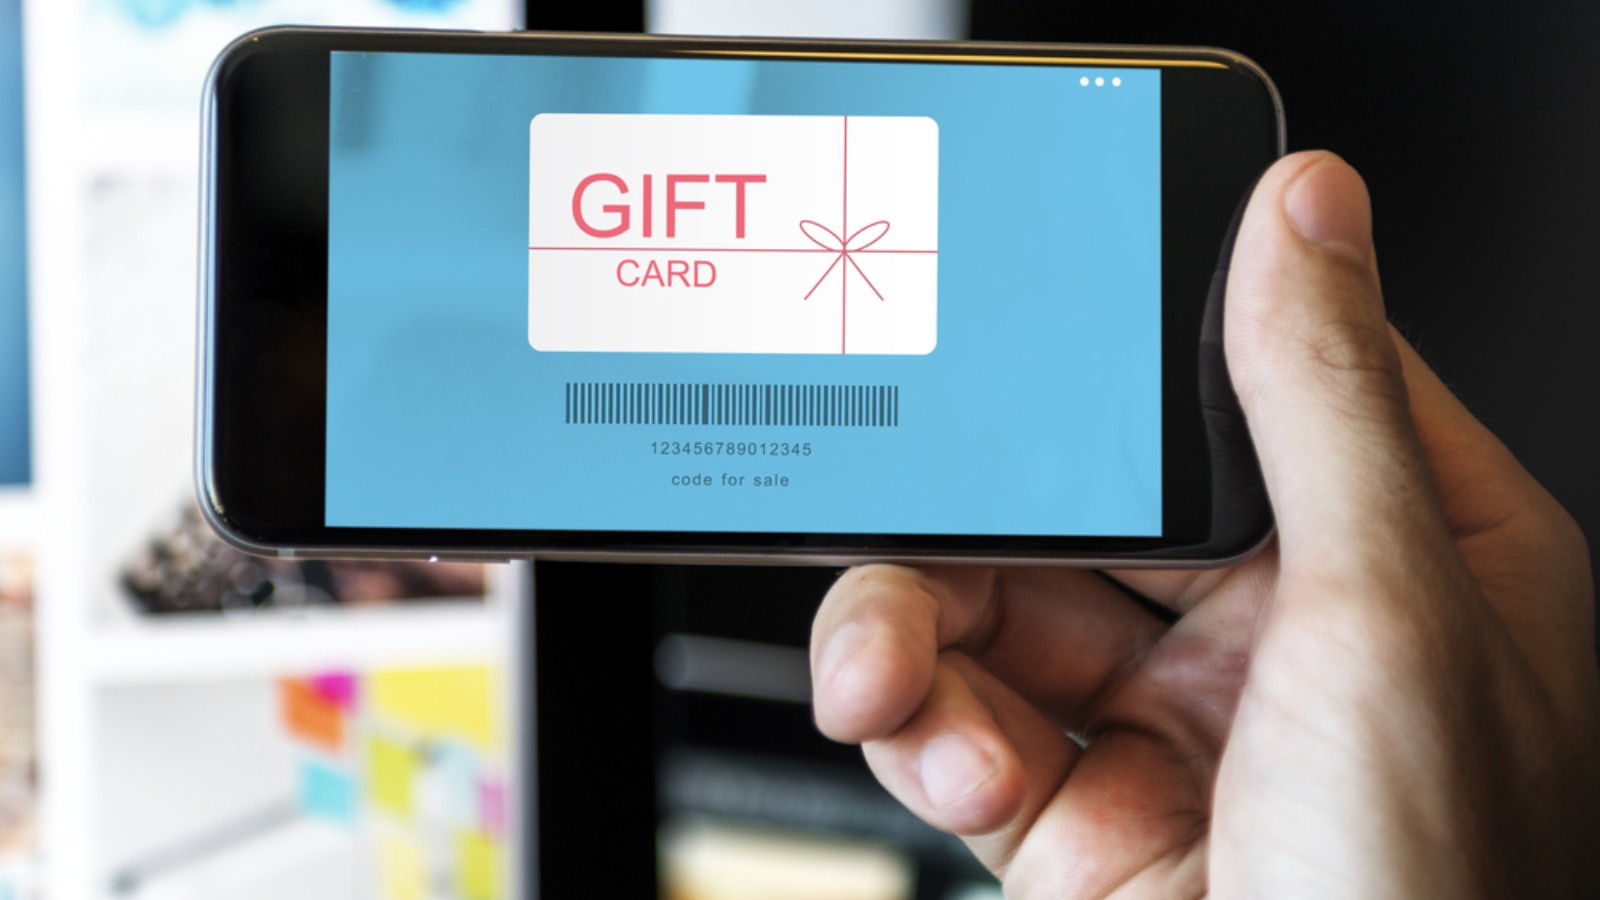 Gift card initiative comes at a time when small businesses have seen a downturn in revenues due to the coronavirus crisis. (Julia Sudnitskaya/Shutterstock.com) 